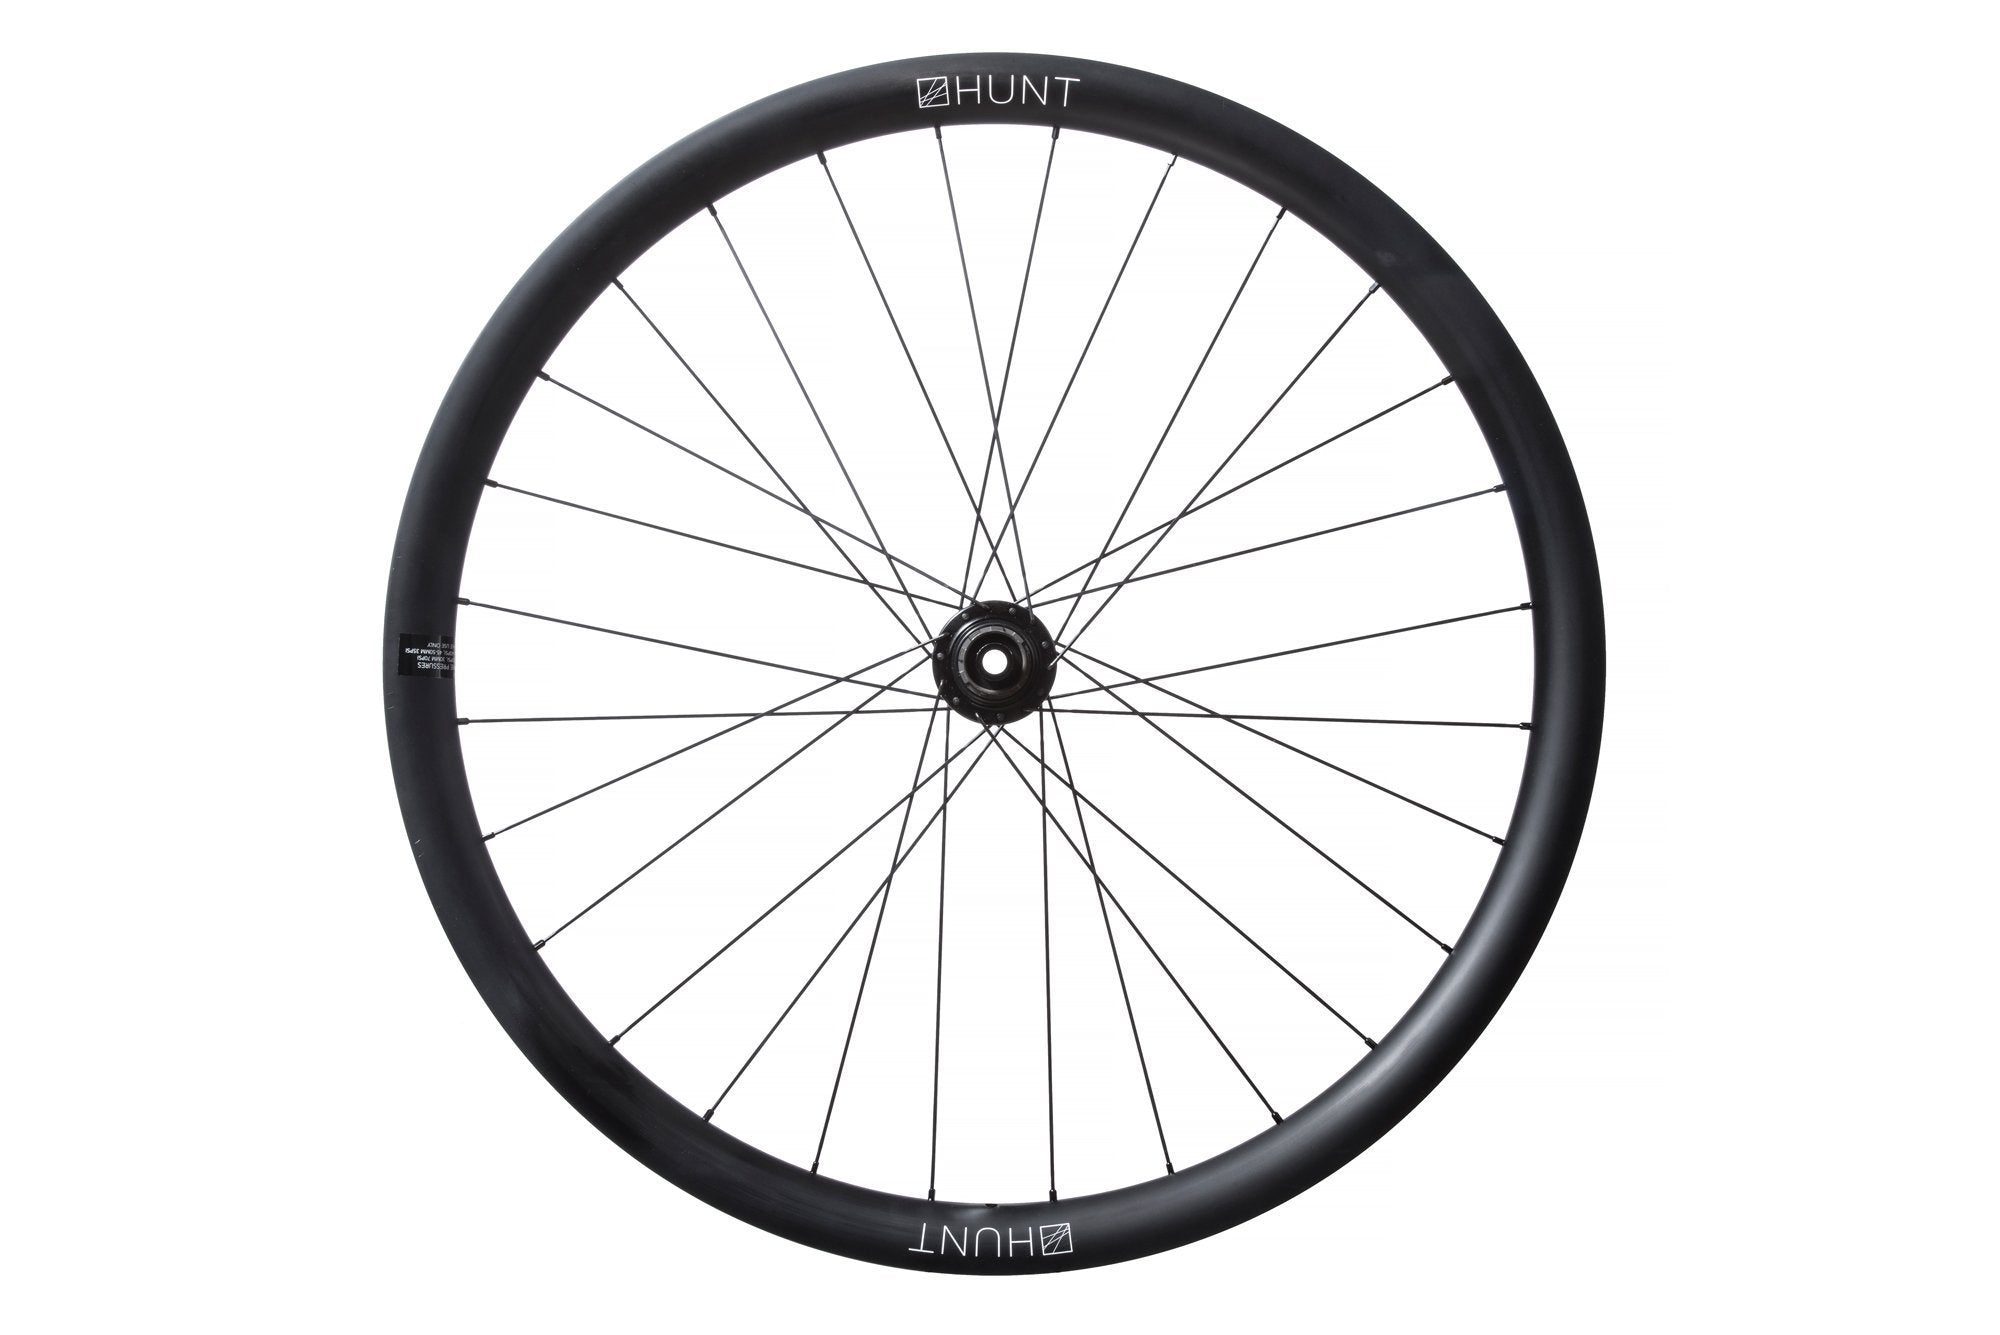 <h1>Spokes</h1><i>We chose the top-of-the-range Pillar Spoke Re-enforcement PSR XTRA models. These butted blade aero spokes are lighter and provide a greater degree of elasticity to maintain tensions and add fatigue resistance. These PSR J-bend spokes feature the 2.2 width at the spoke head providing more material in this high stress area. The nipples come with a square head so you can achieve precise tensioning. Combining these components well is key which is why all Hunt wheels are hand-built.</i>